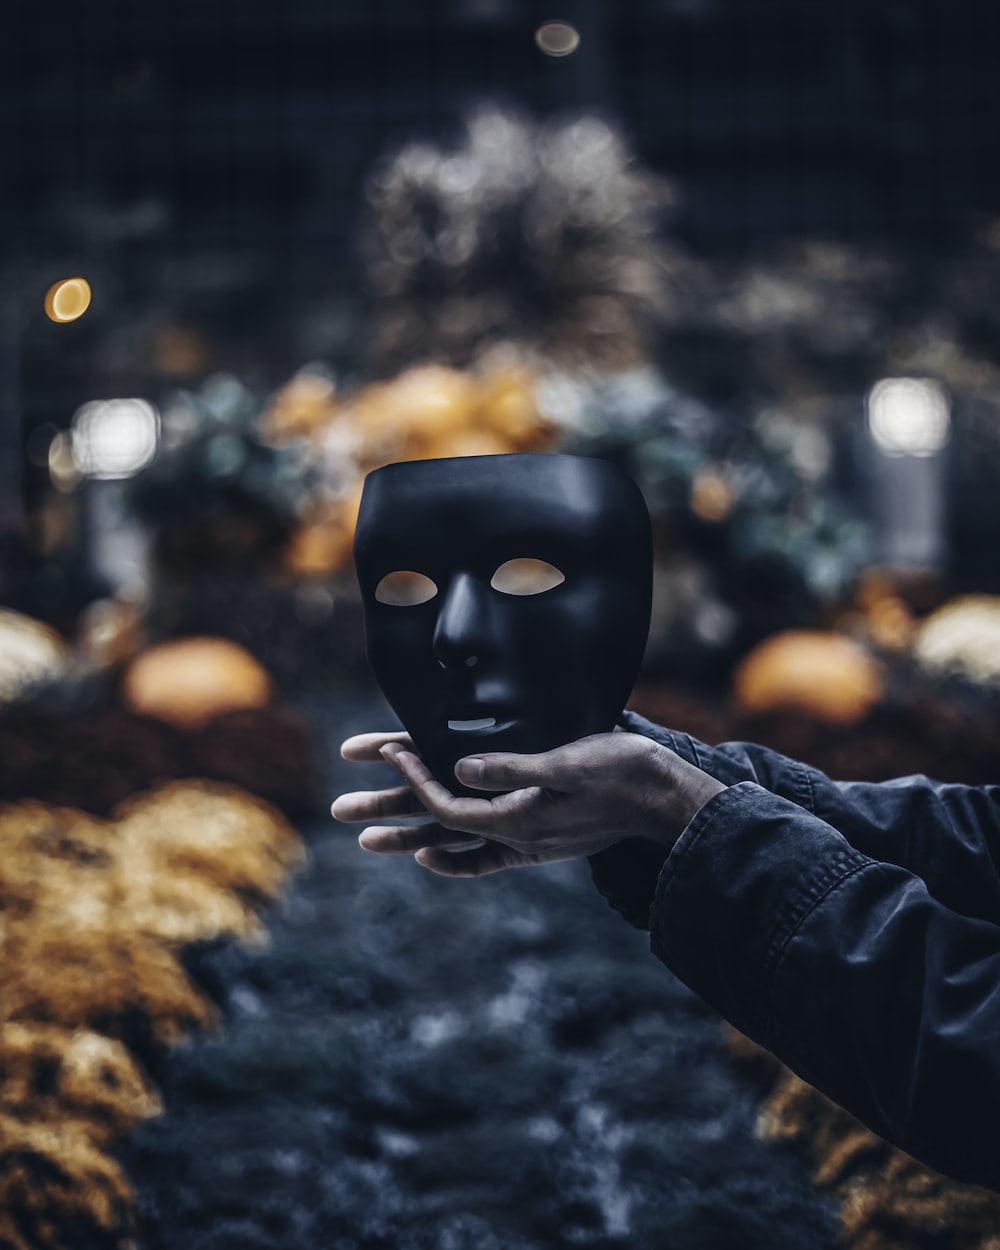 Mask pictures download free images stock photos on